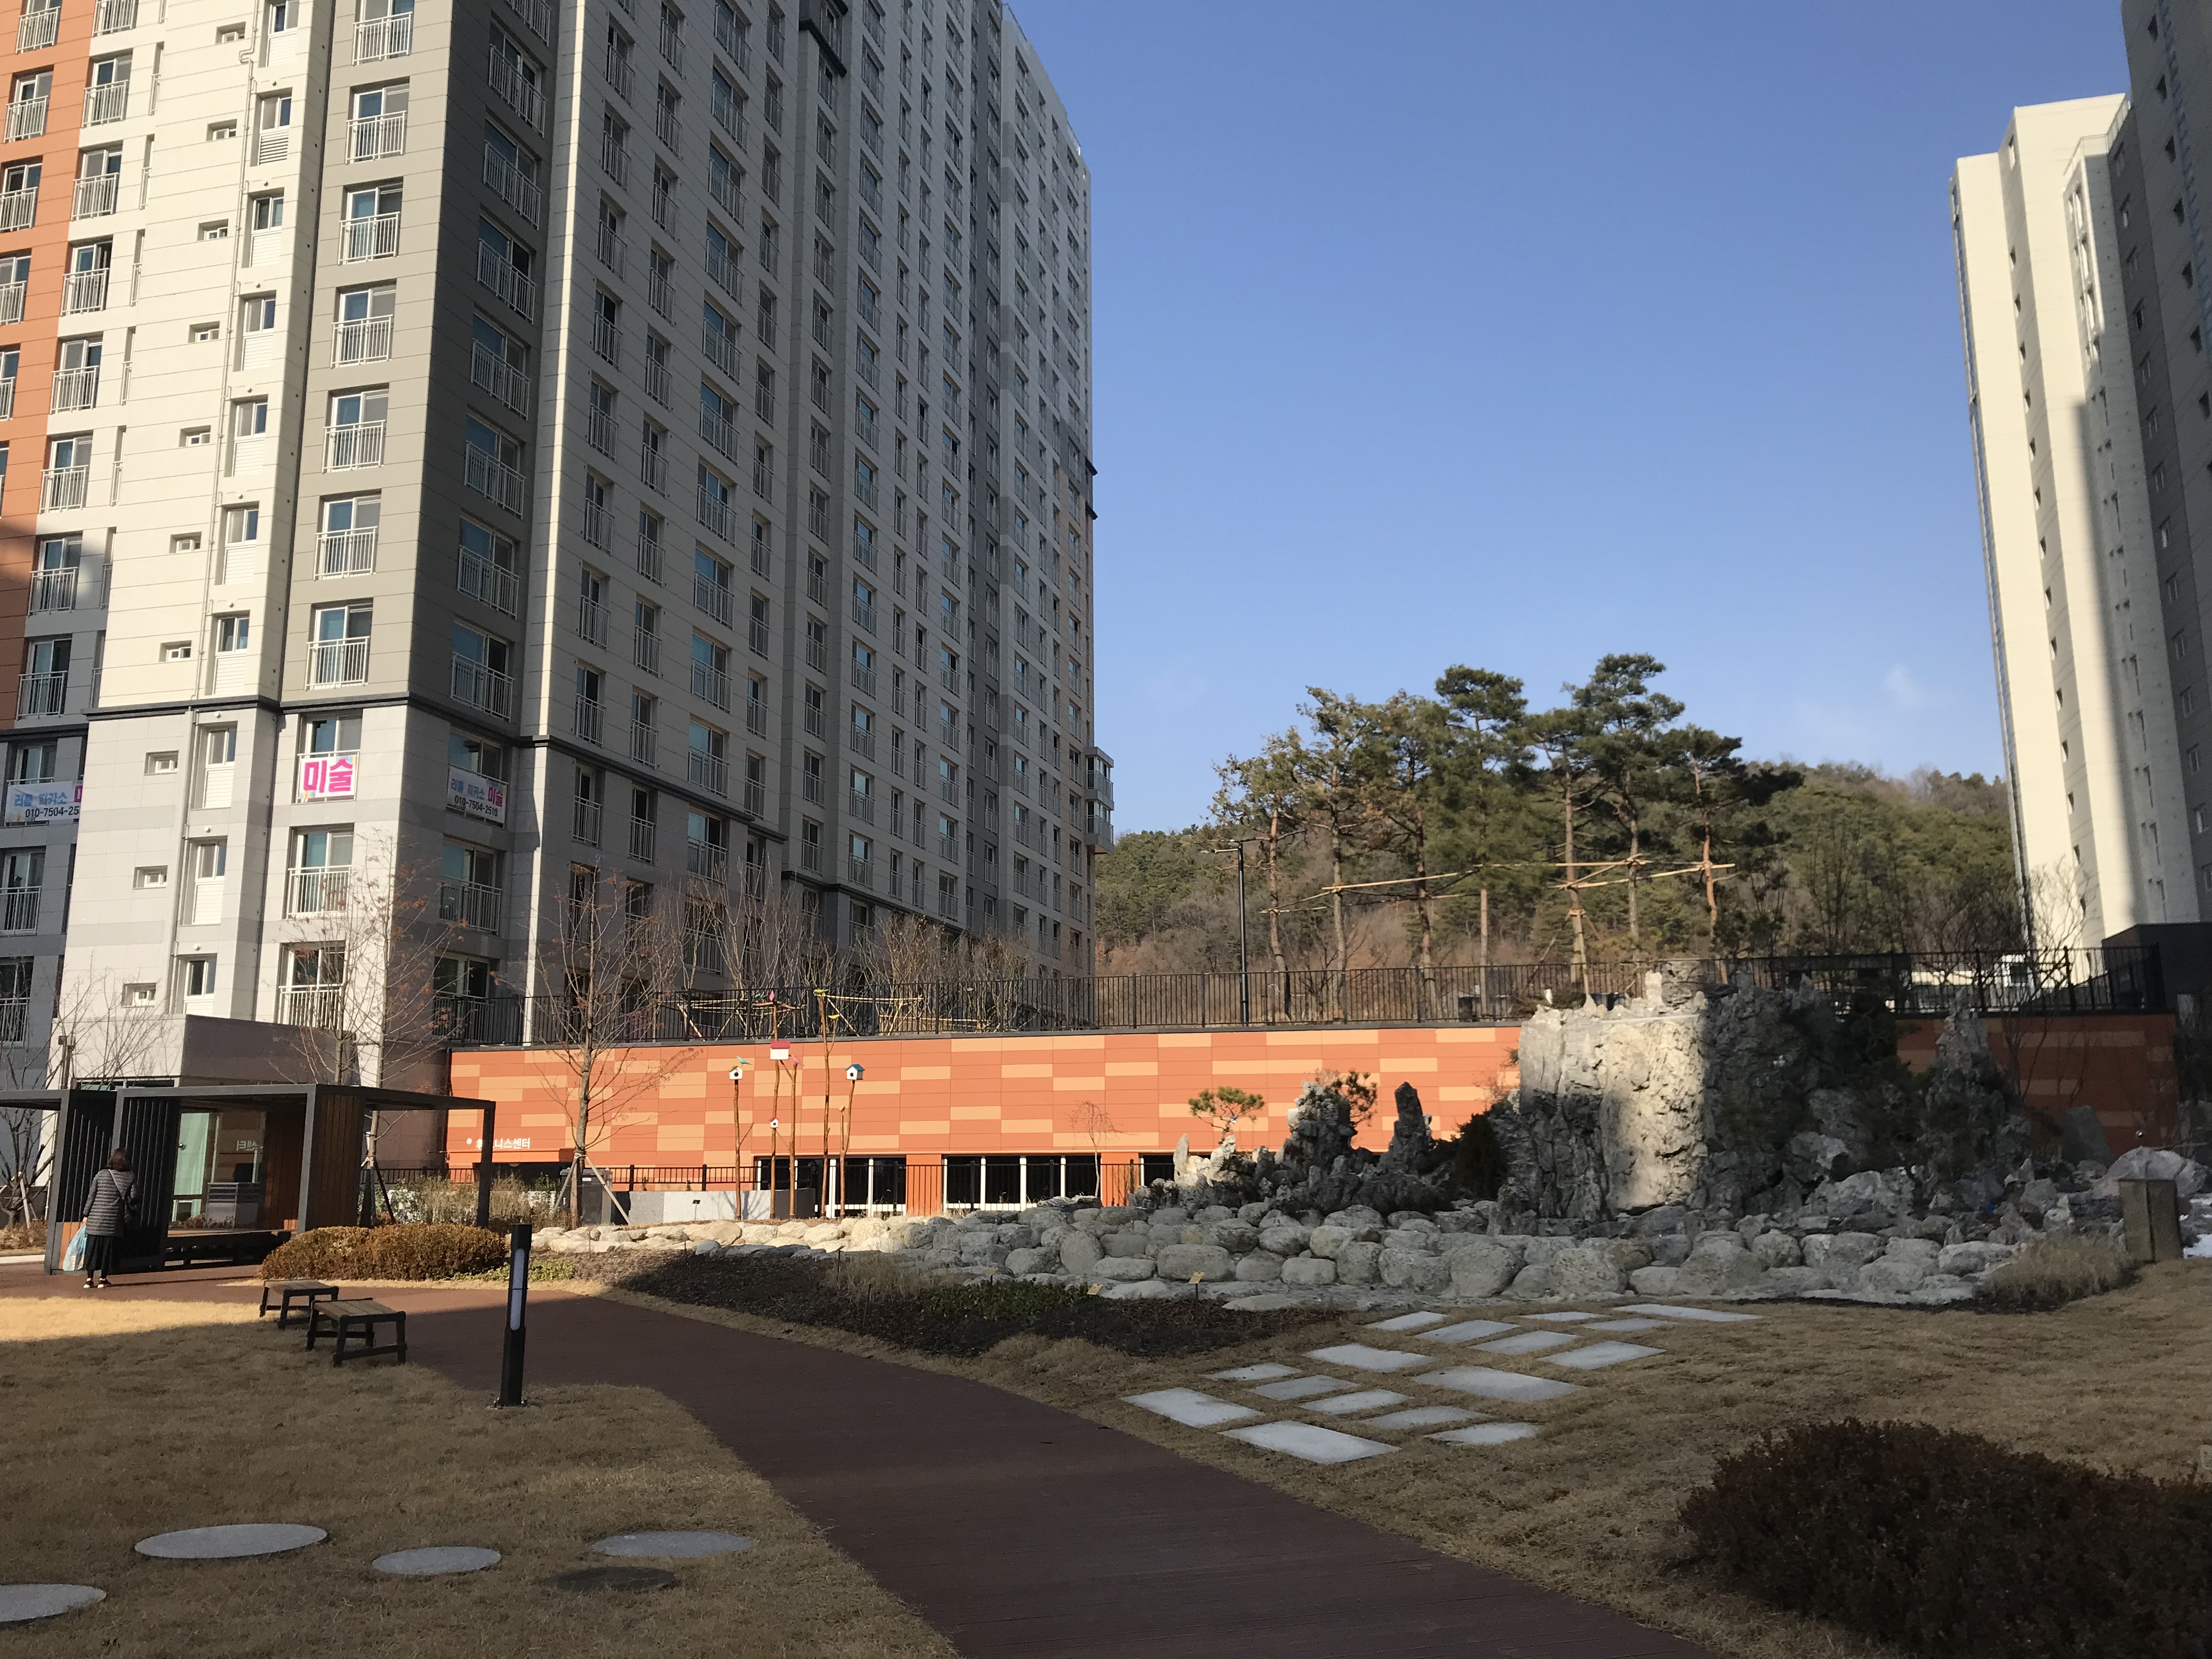 New things to enjoy in Sejong City